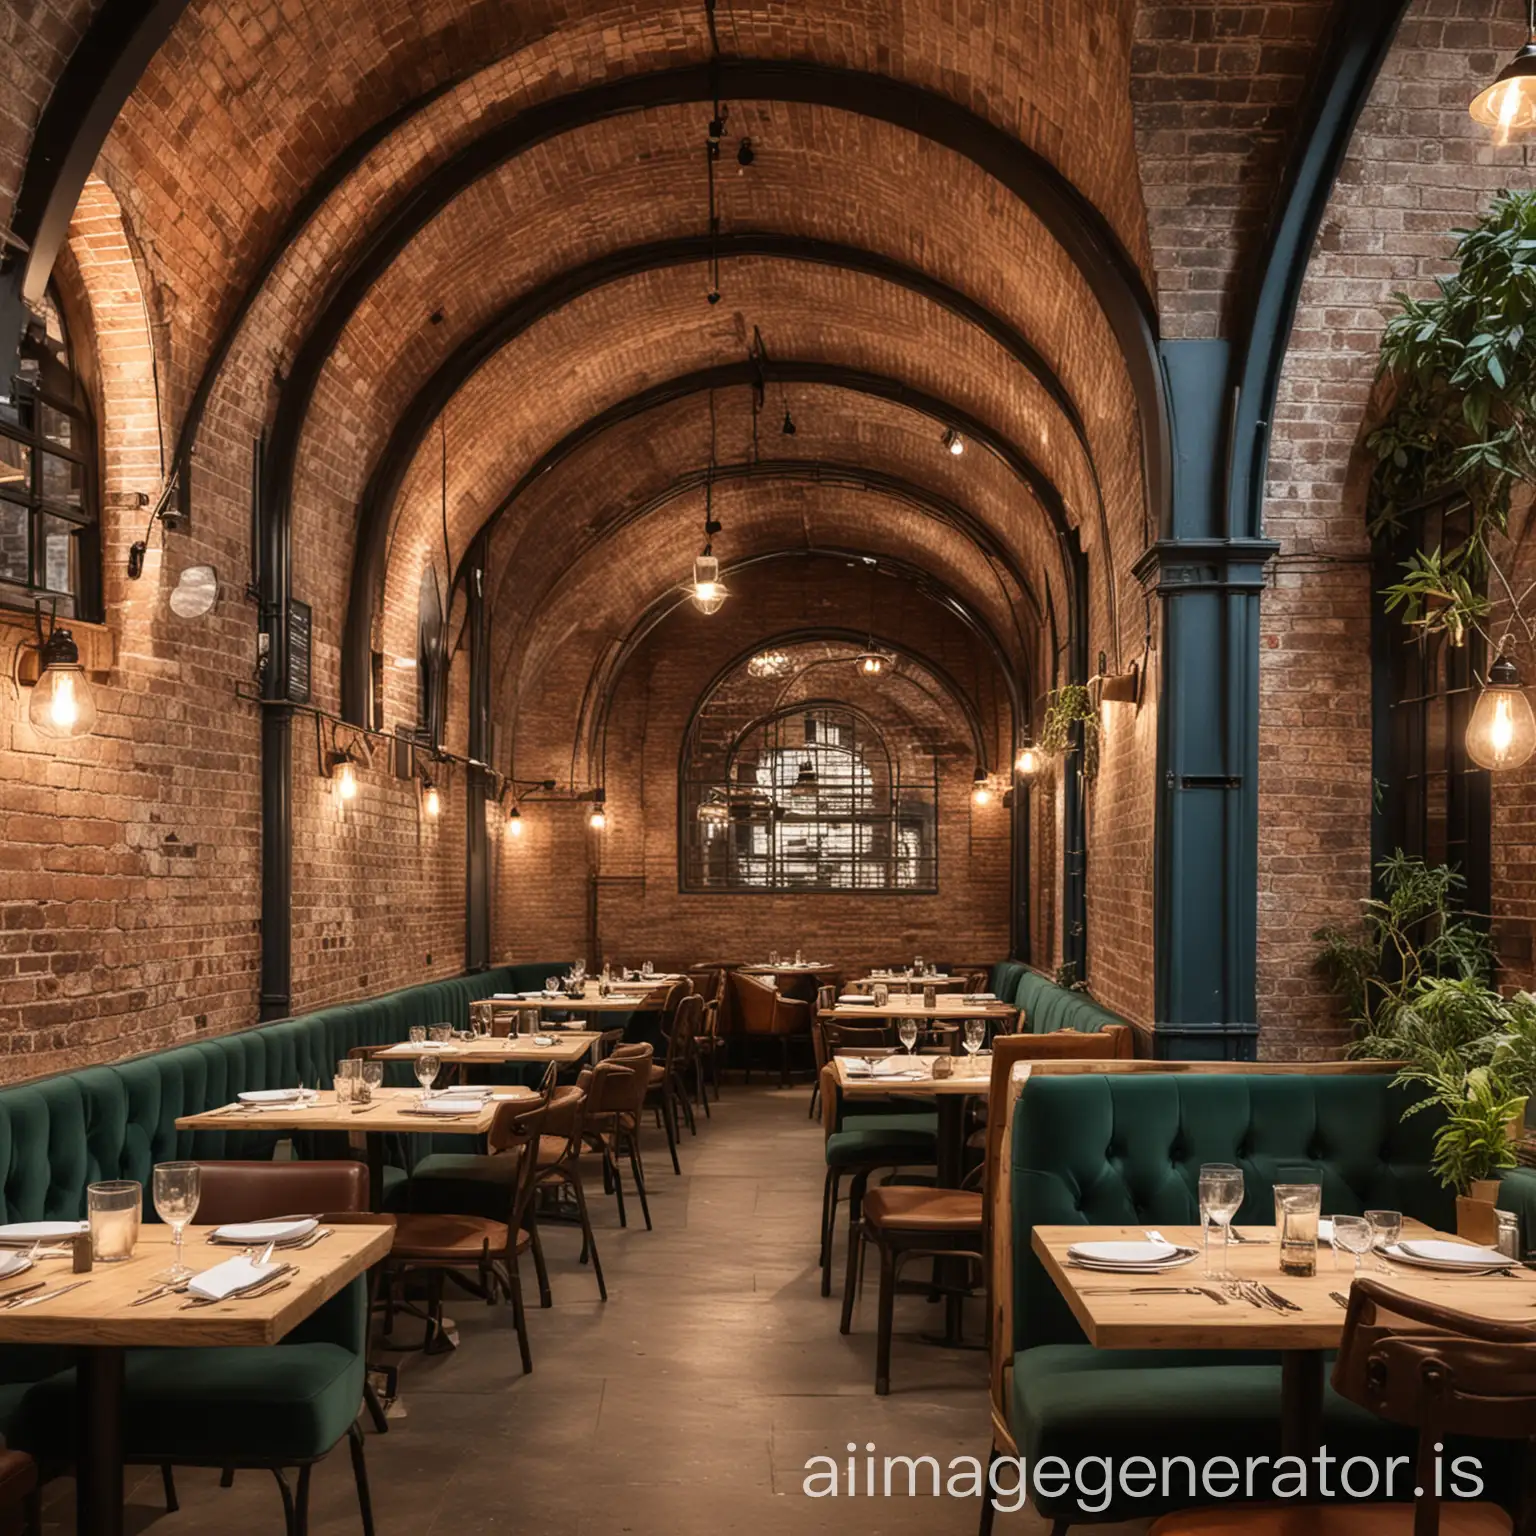 Trendy-Instagramable-London-Restaurant-Interior-Design-in-a-Railway-Arch-Setting